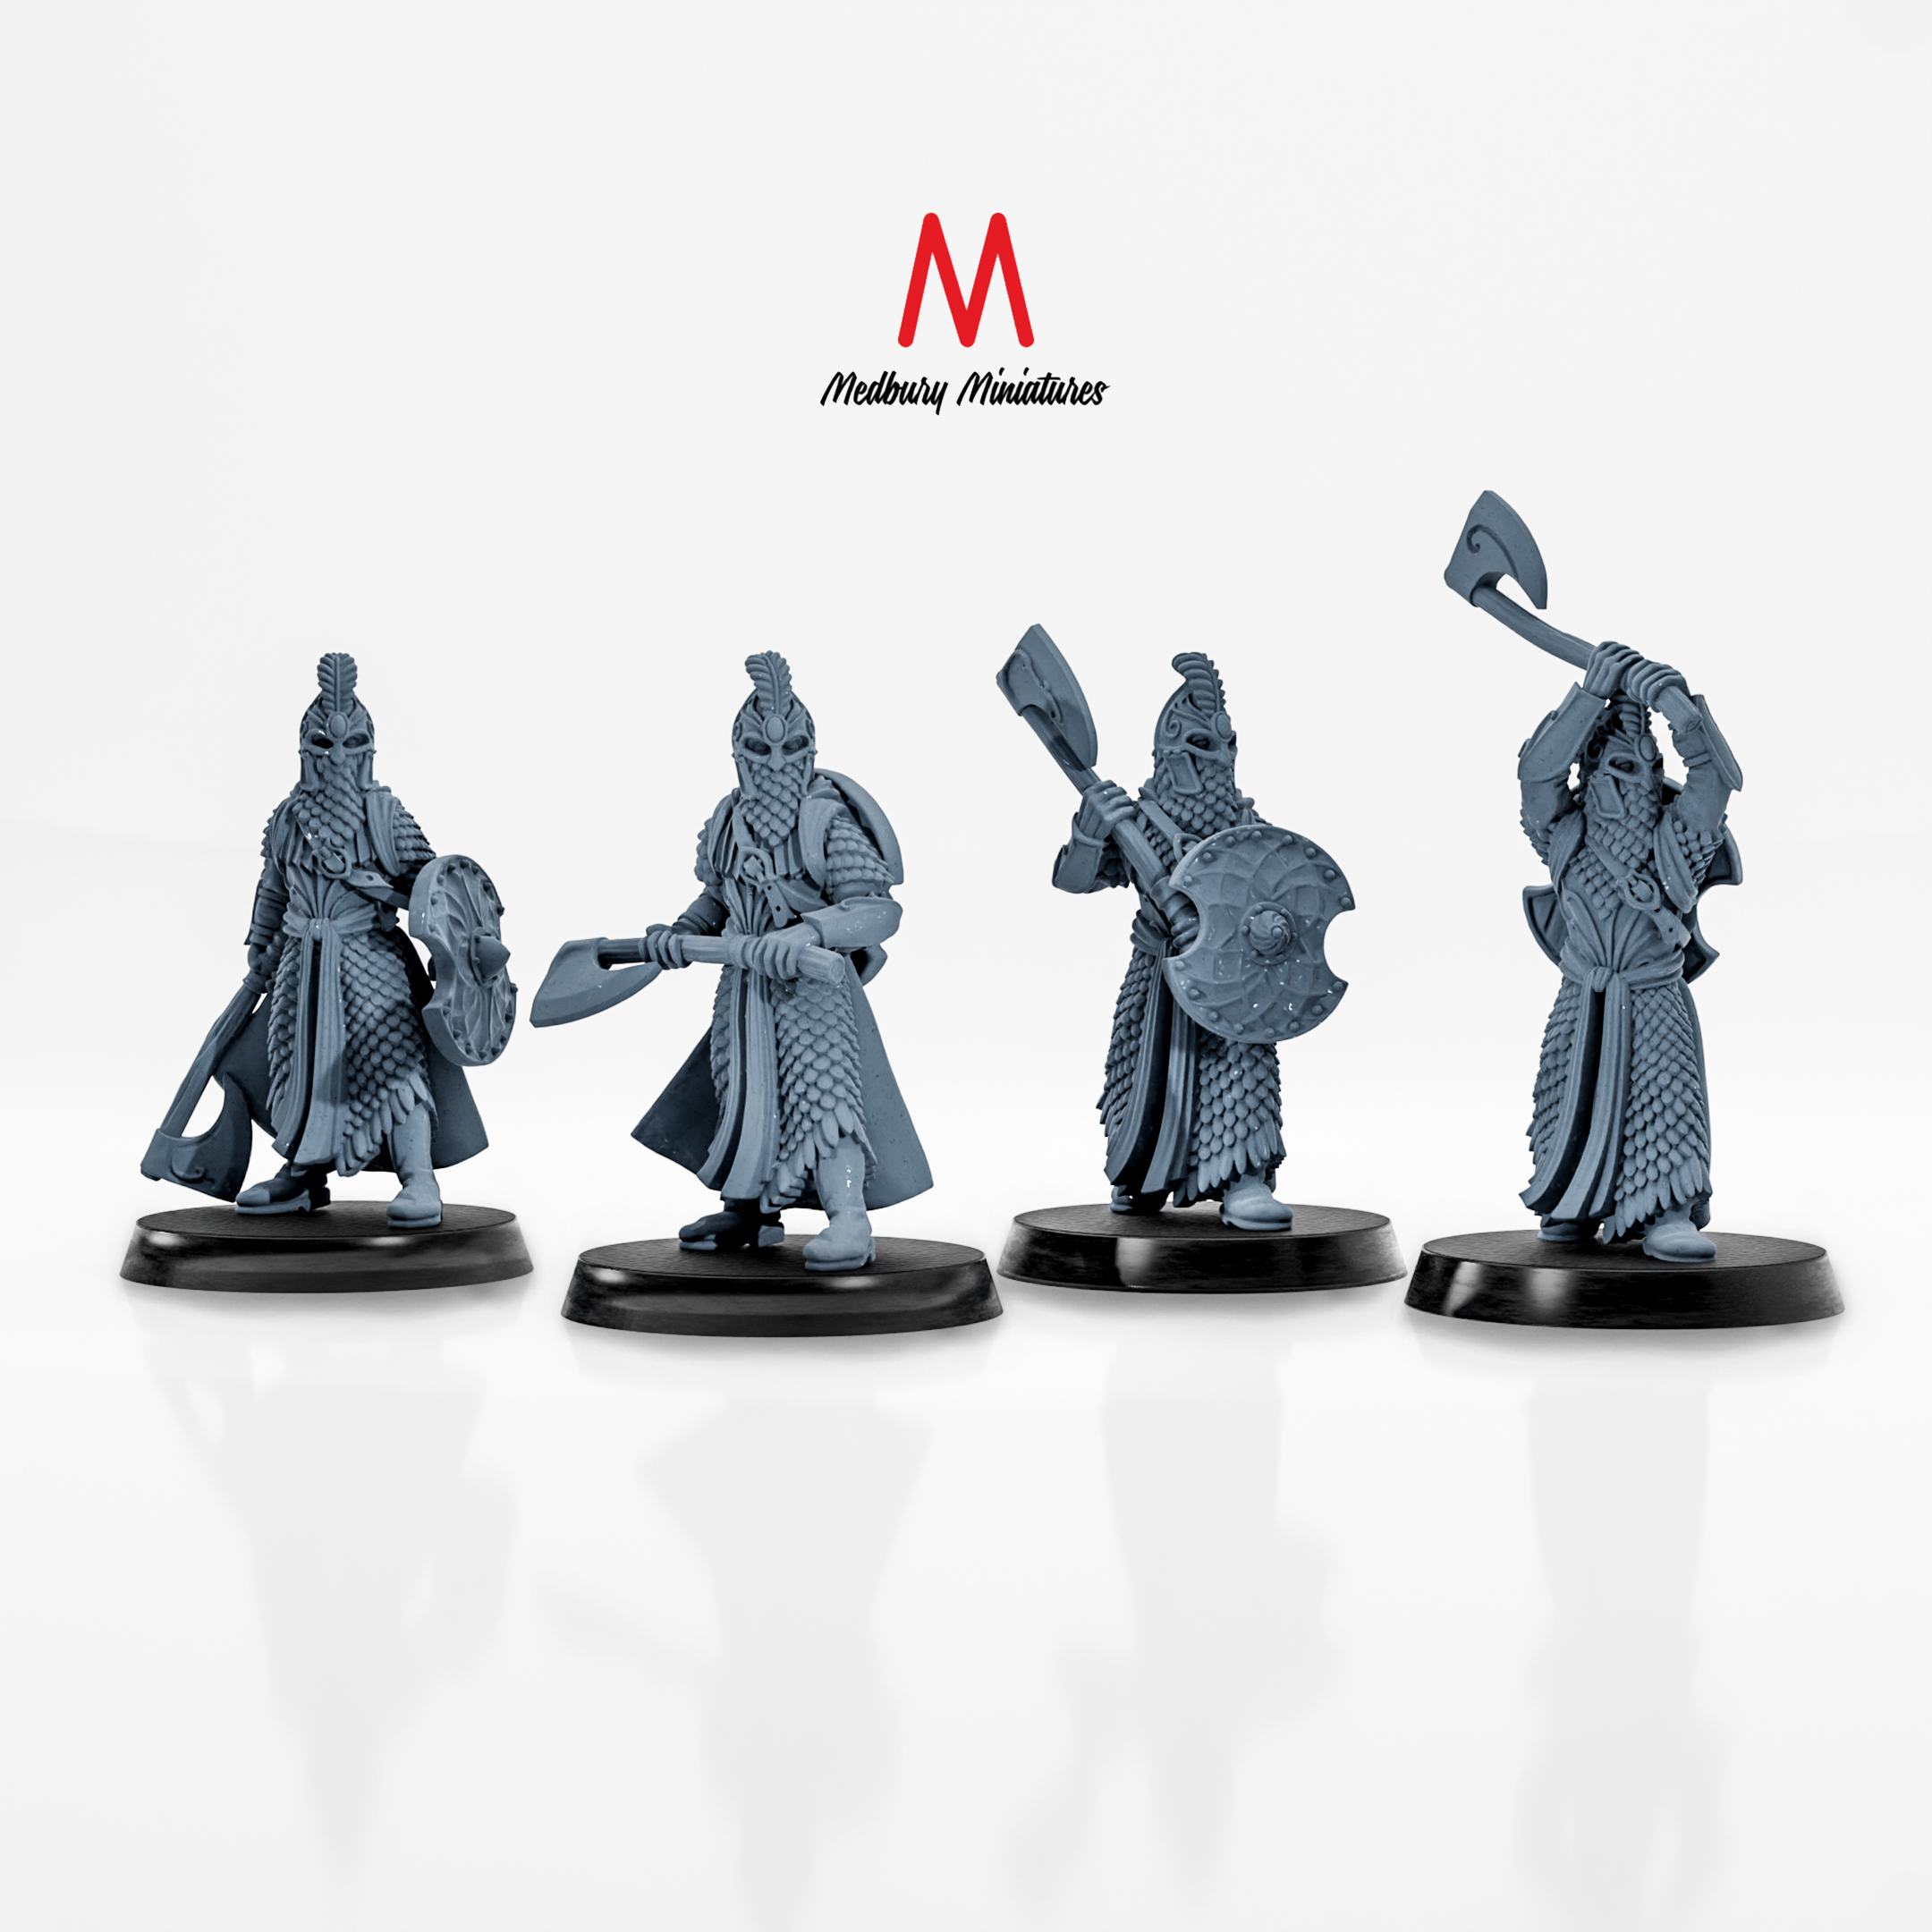 Wood Elves with Axes wargaming miniatures by Medbury Miniatures 3d Printed by Forgemaster Miniatures